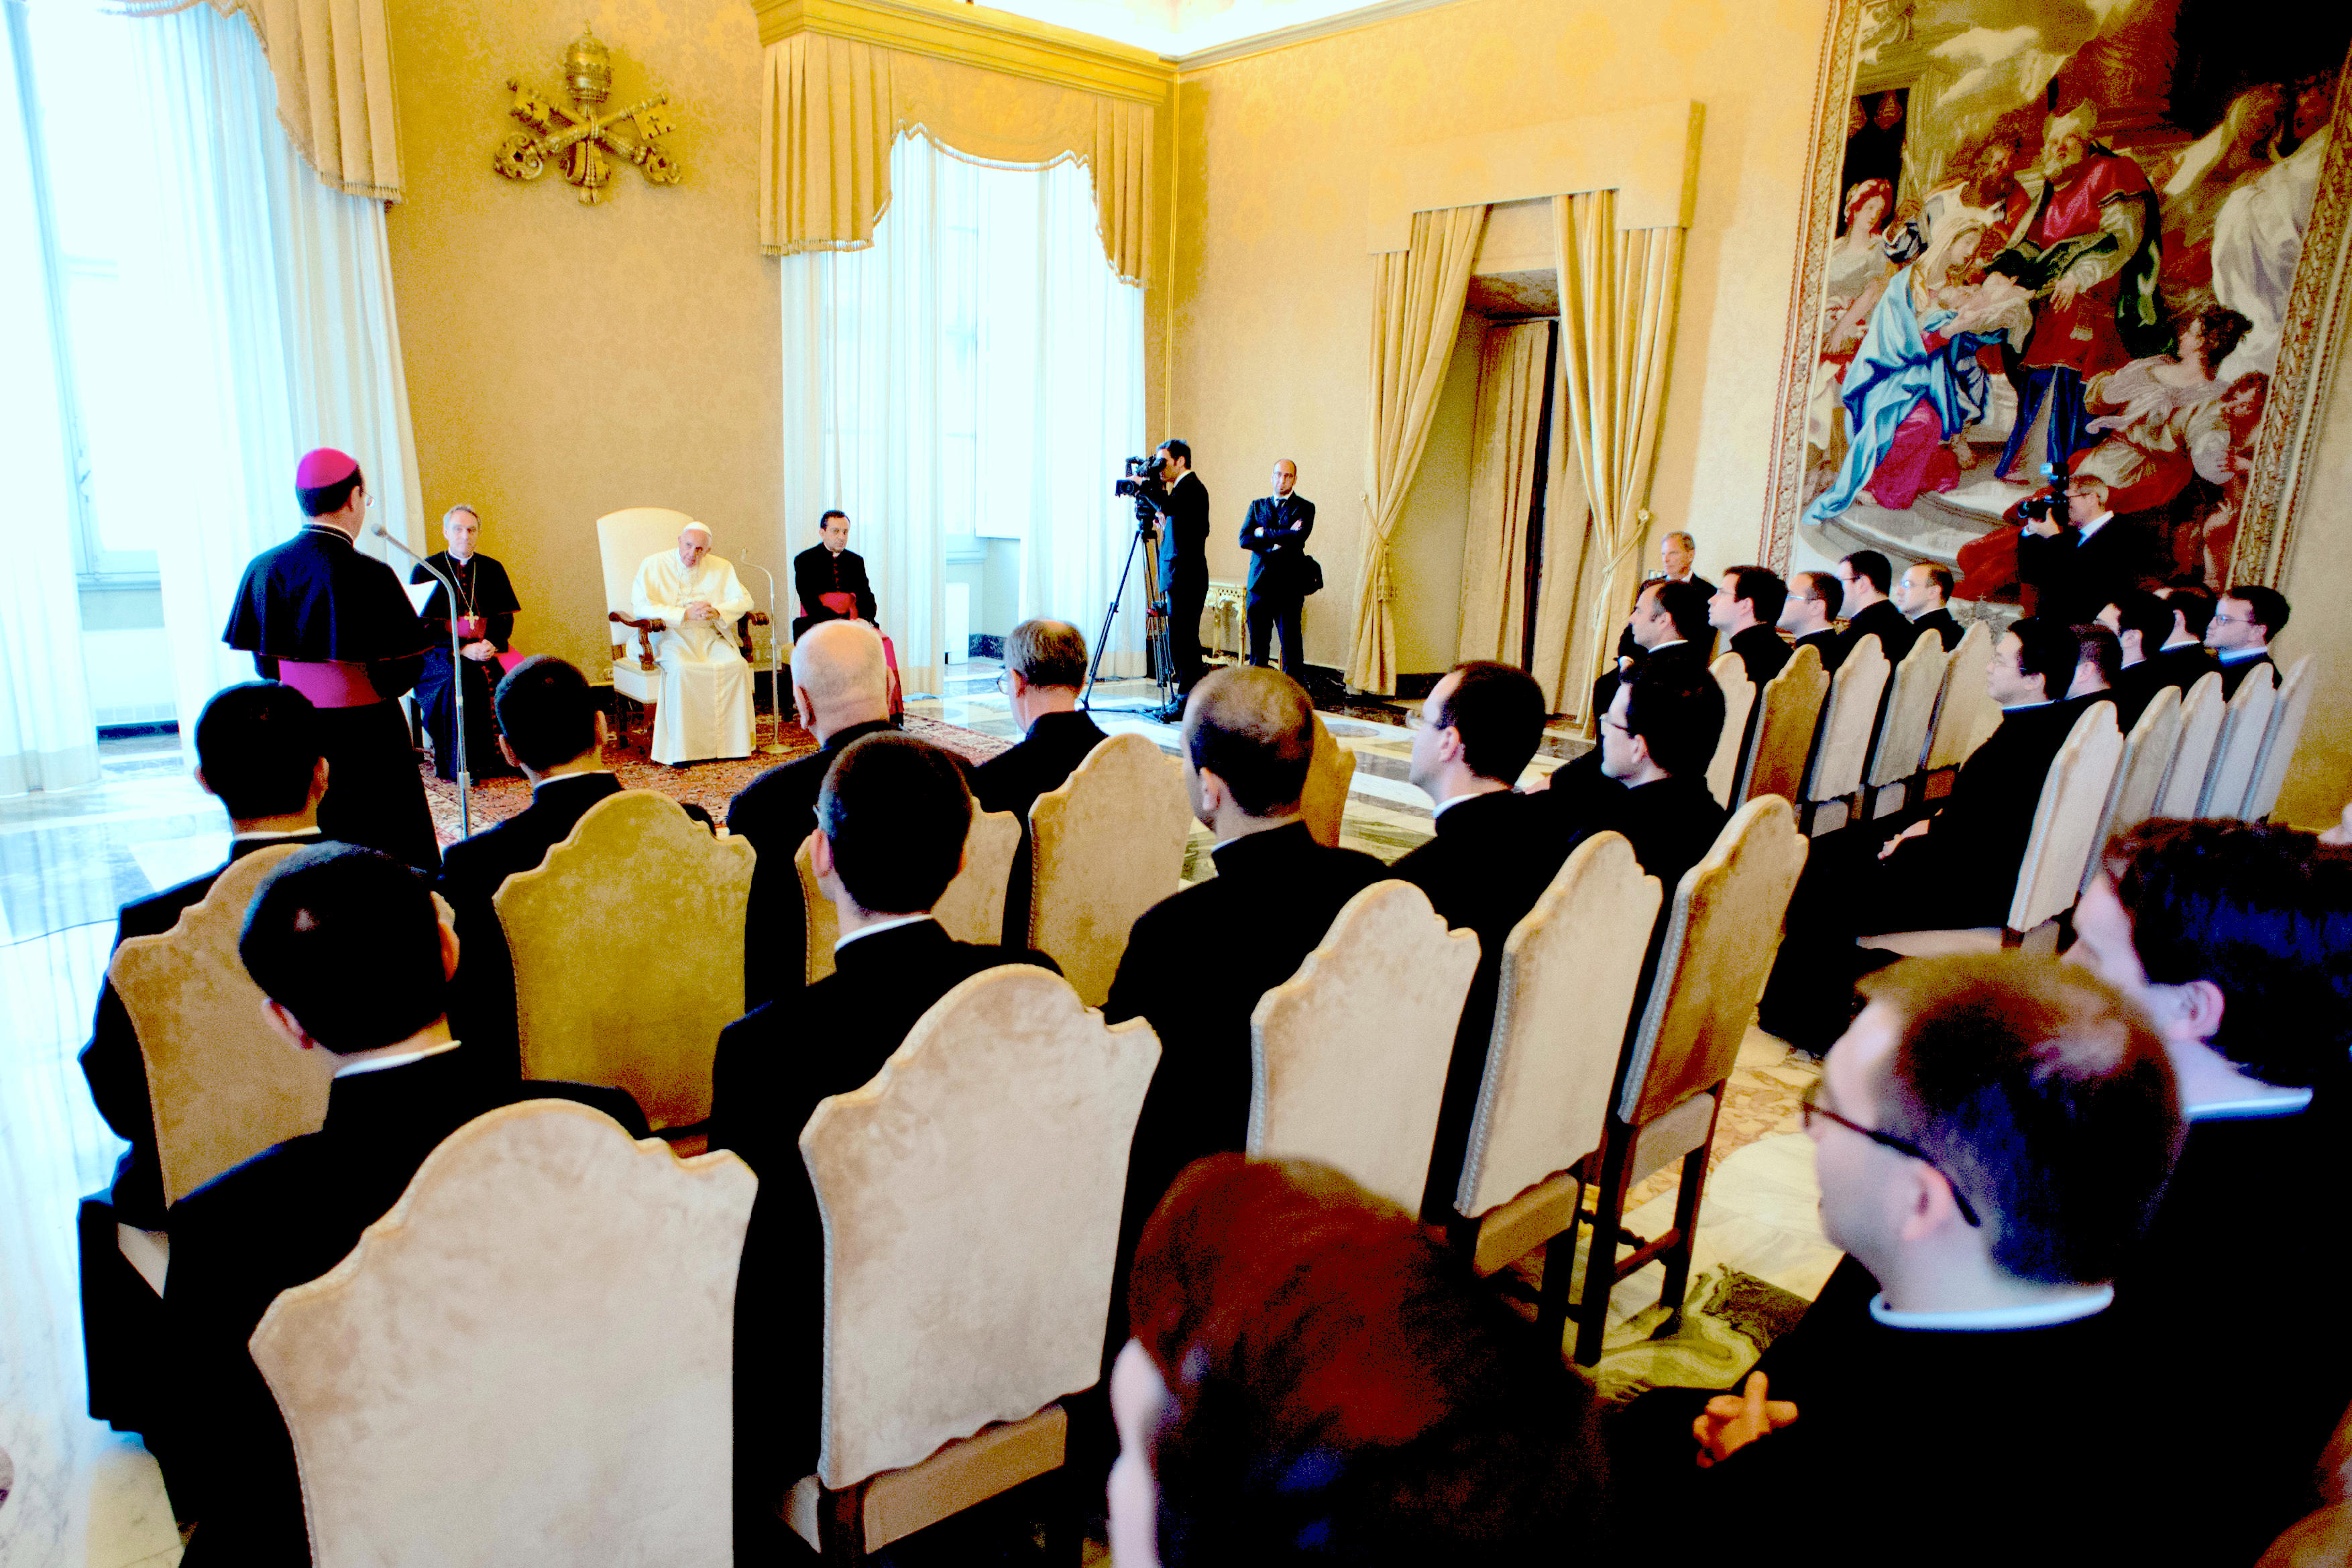 Pope Francis meets at the members of the Pontifical Ecclesiastical Academy in the Apostolic Palace